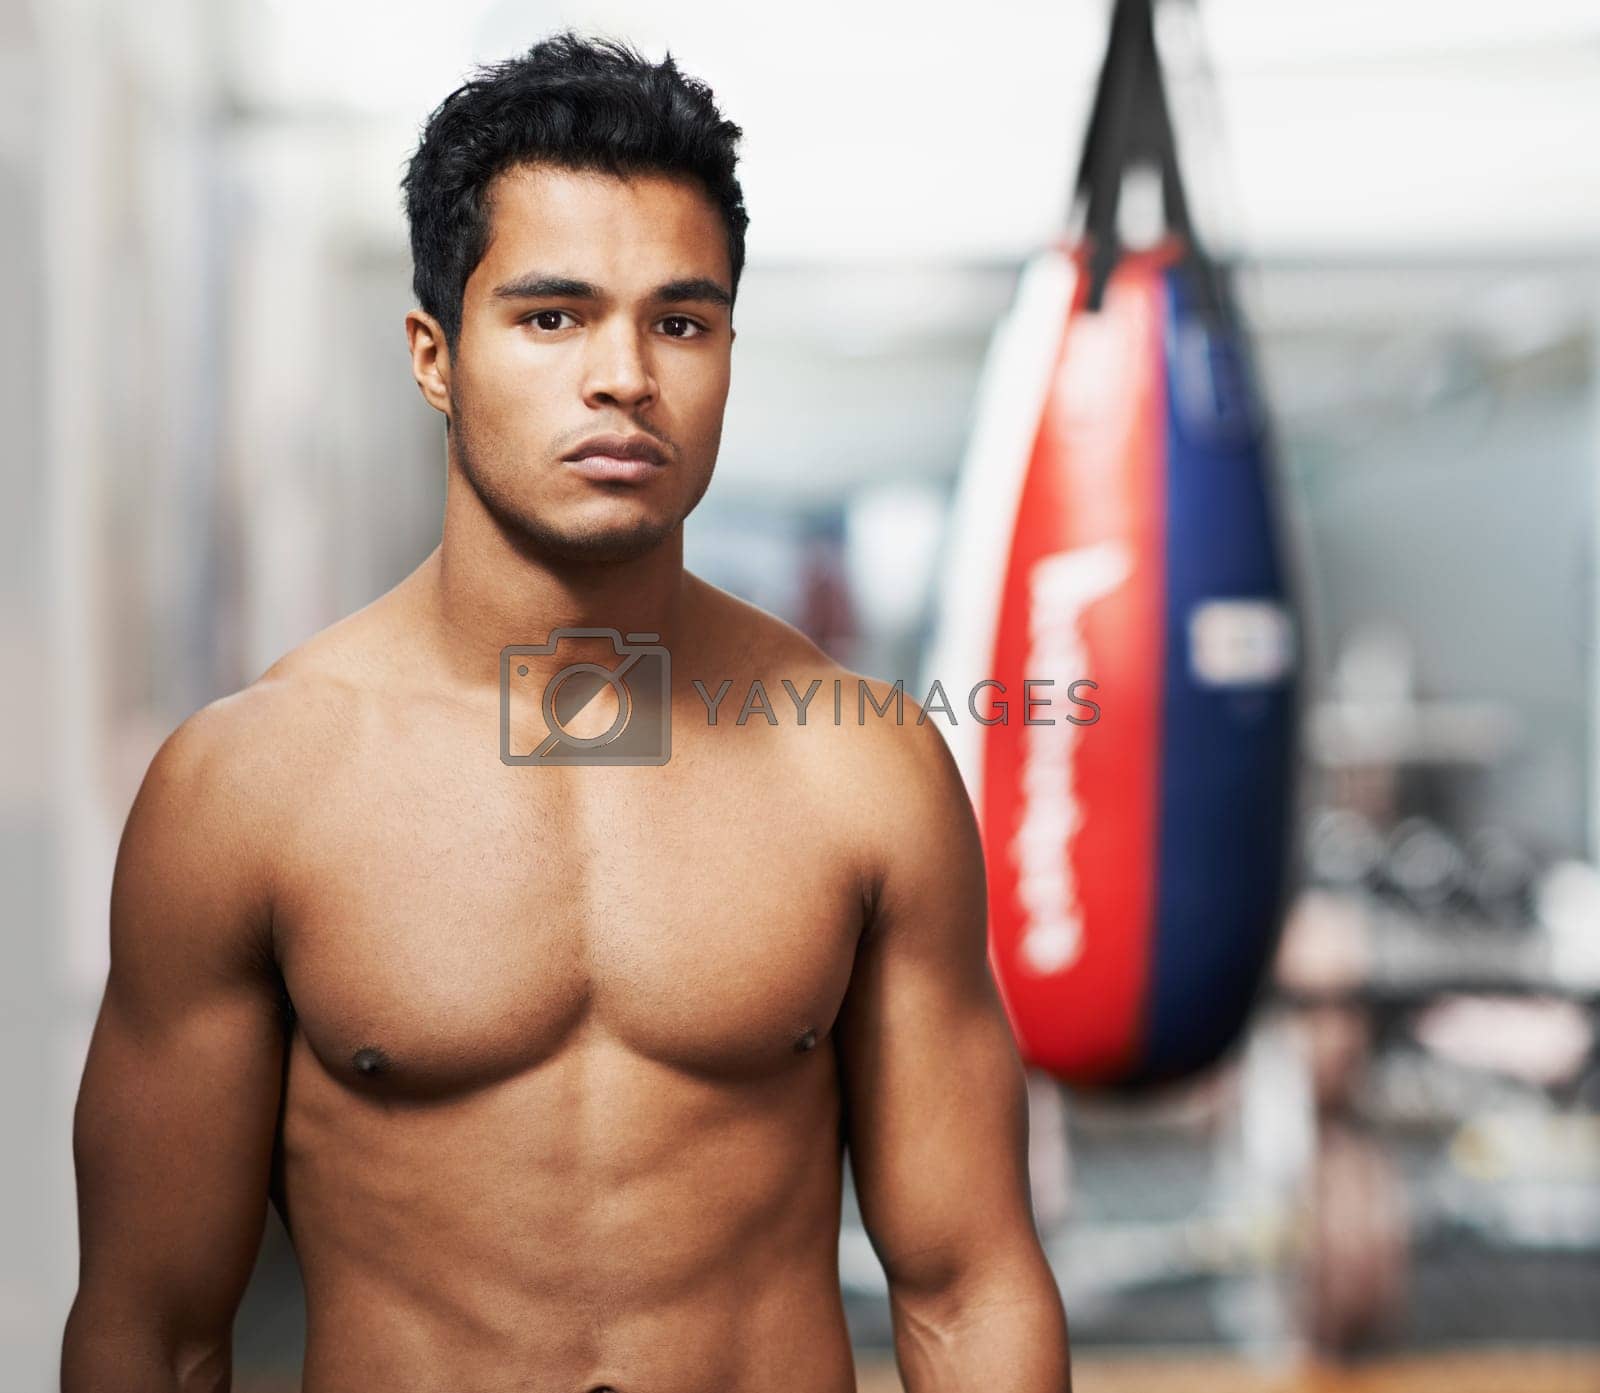 Royalty free image of Boxing is his whole life. Portrait of a young boxer standing in a gym. by YuriArcurs